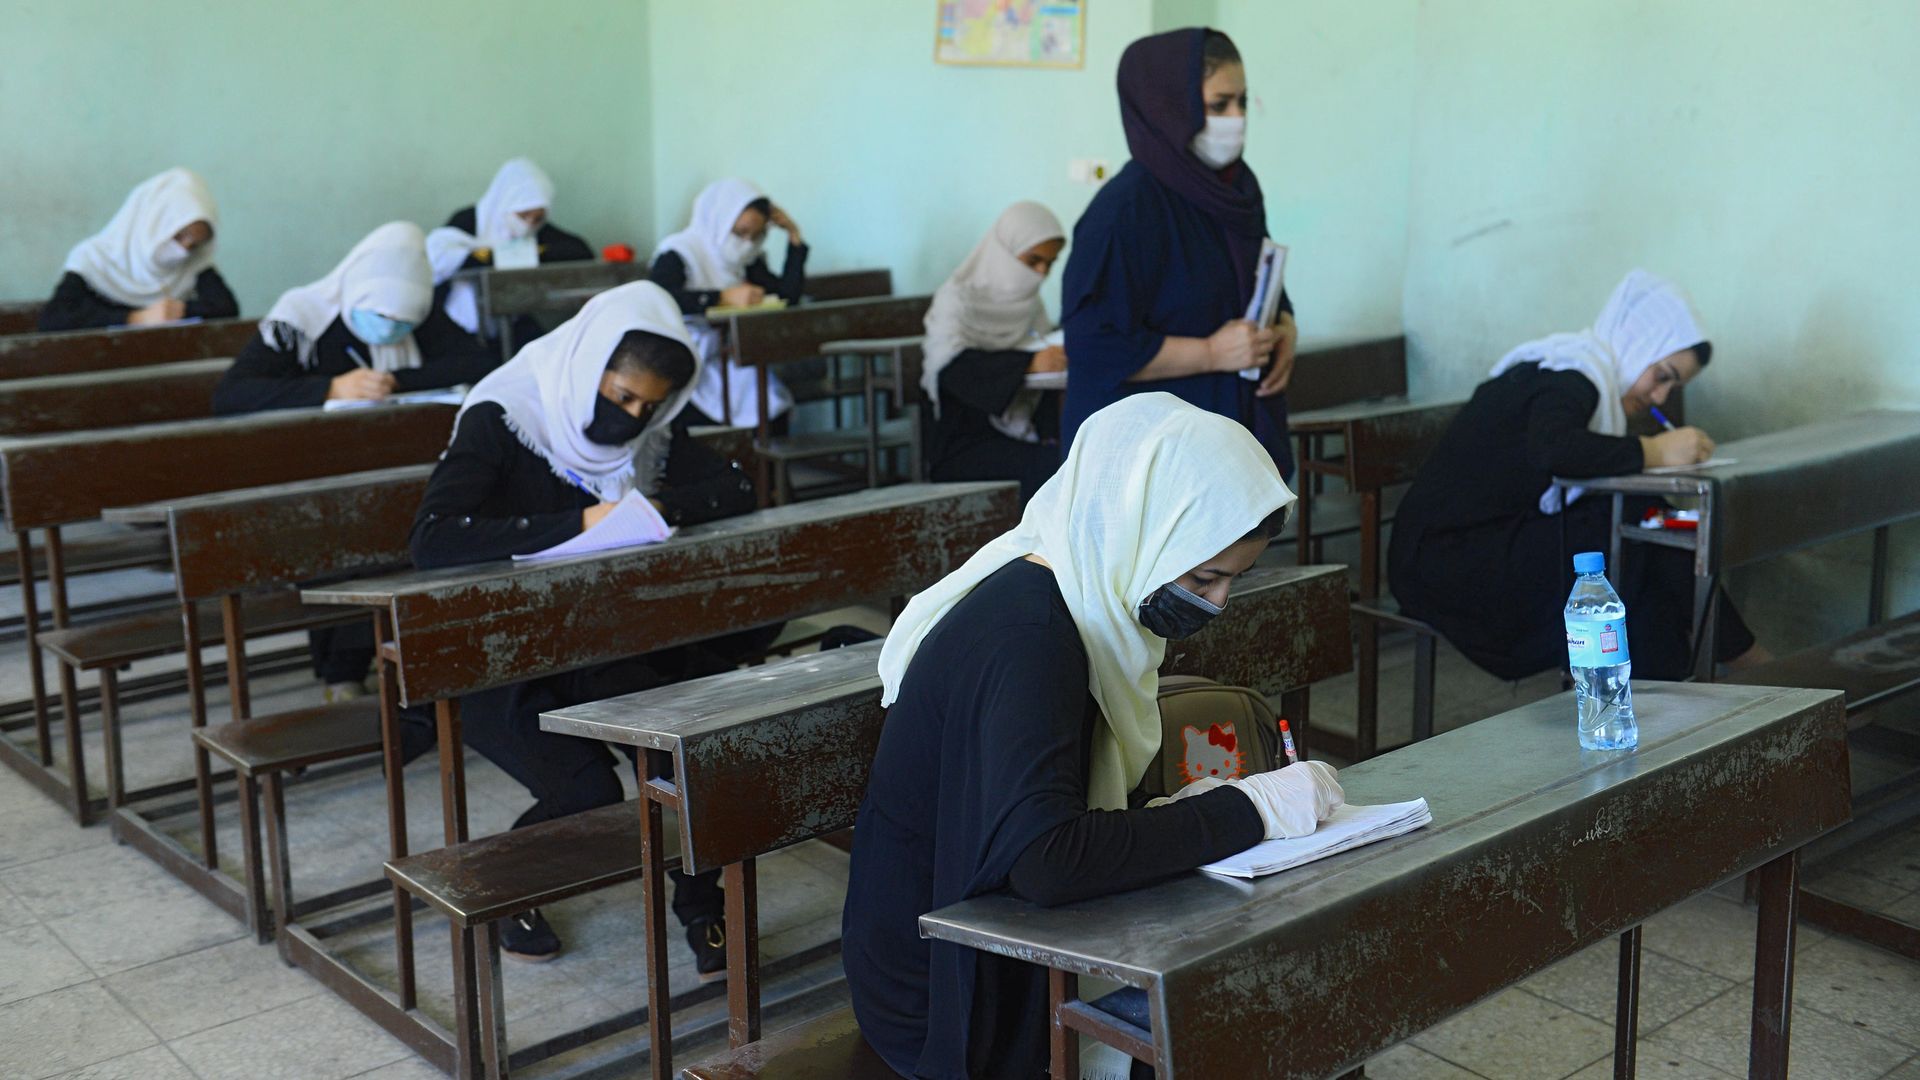 Afghan girl students wearing facemasks attend a class on the first day after their school was reopened, which was earlier closed due to the COVID-19 coronavirus pandemic, in Herat on August 22, 2020. 